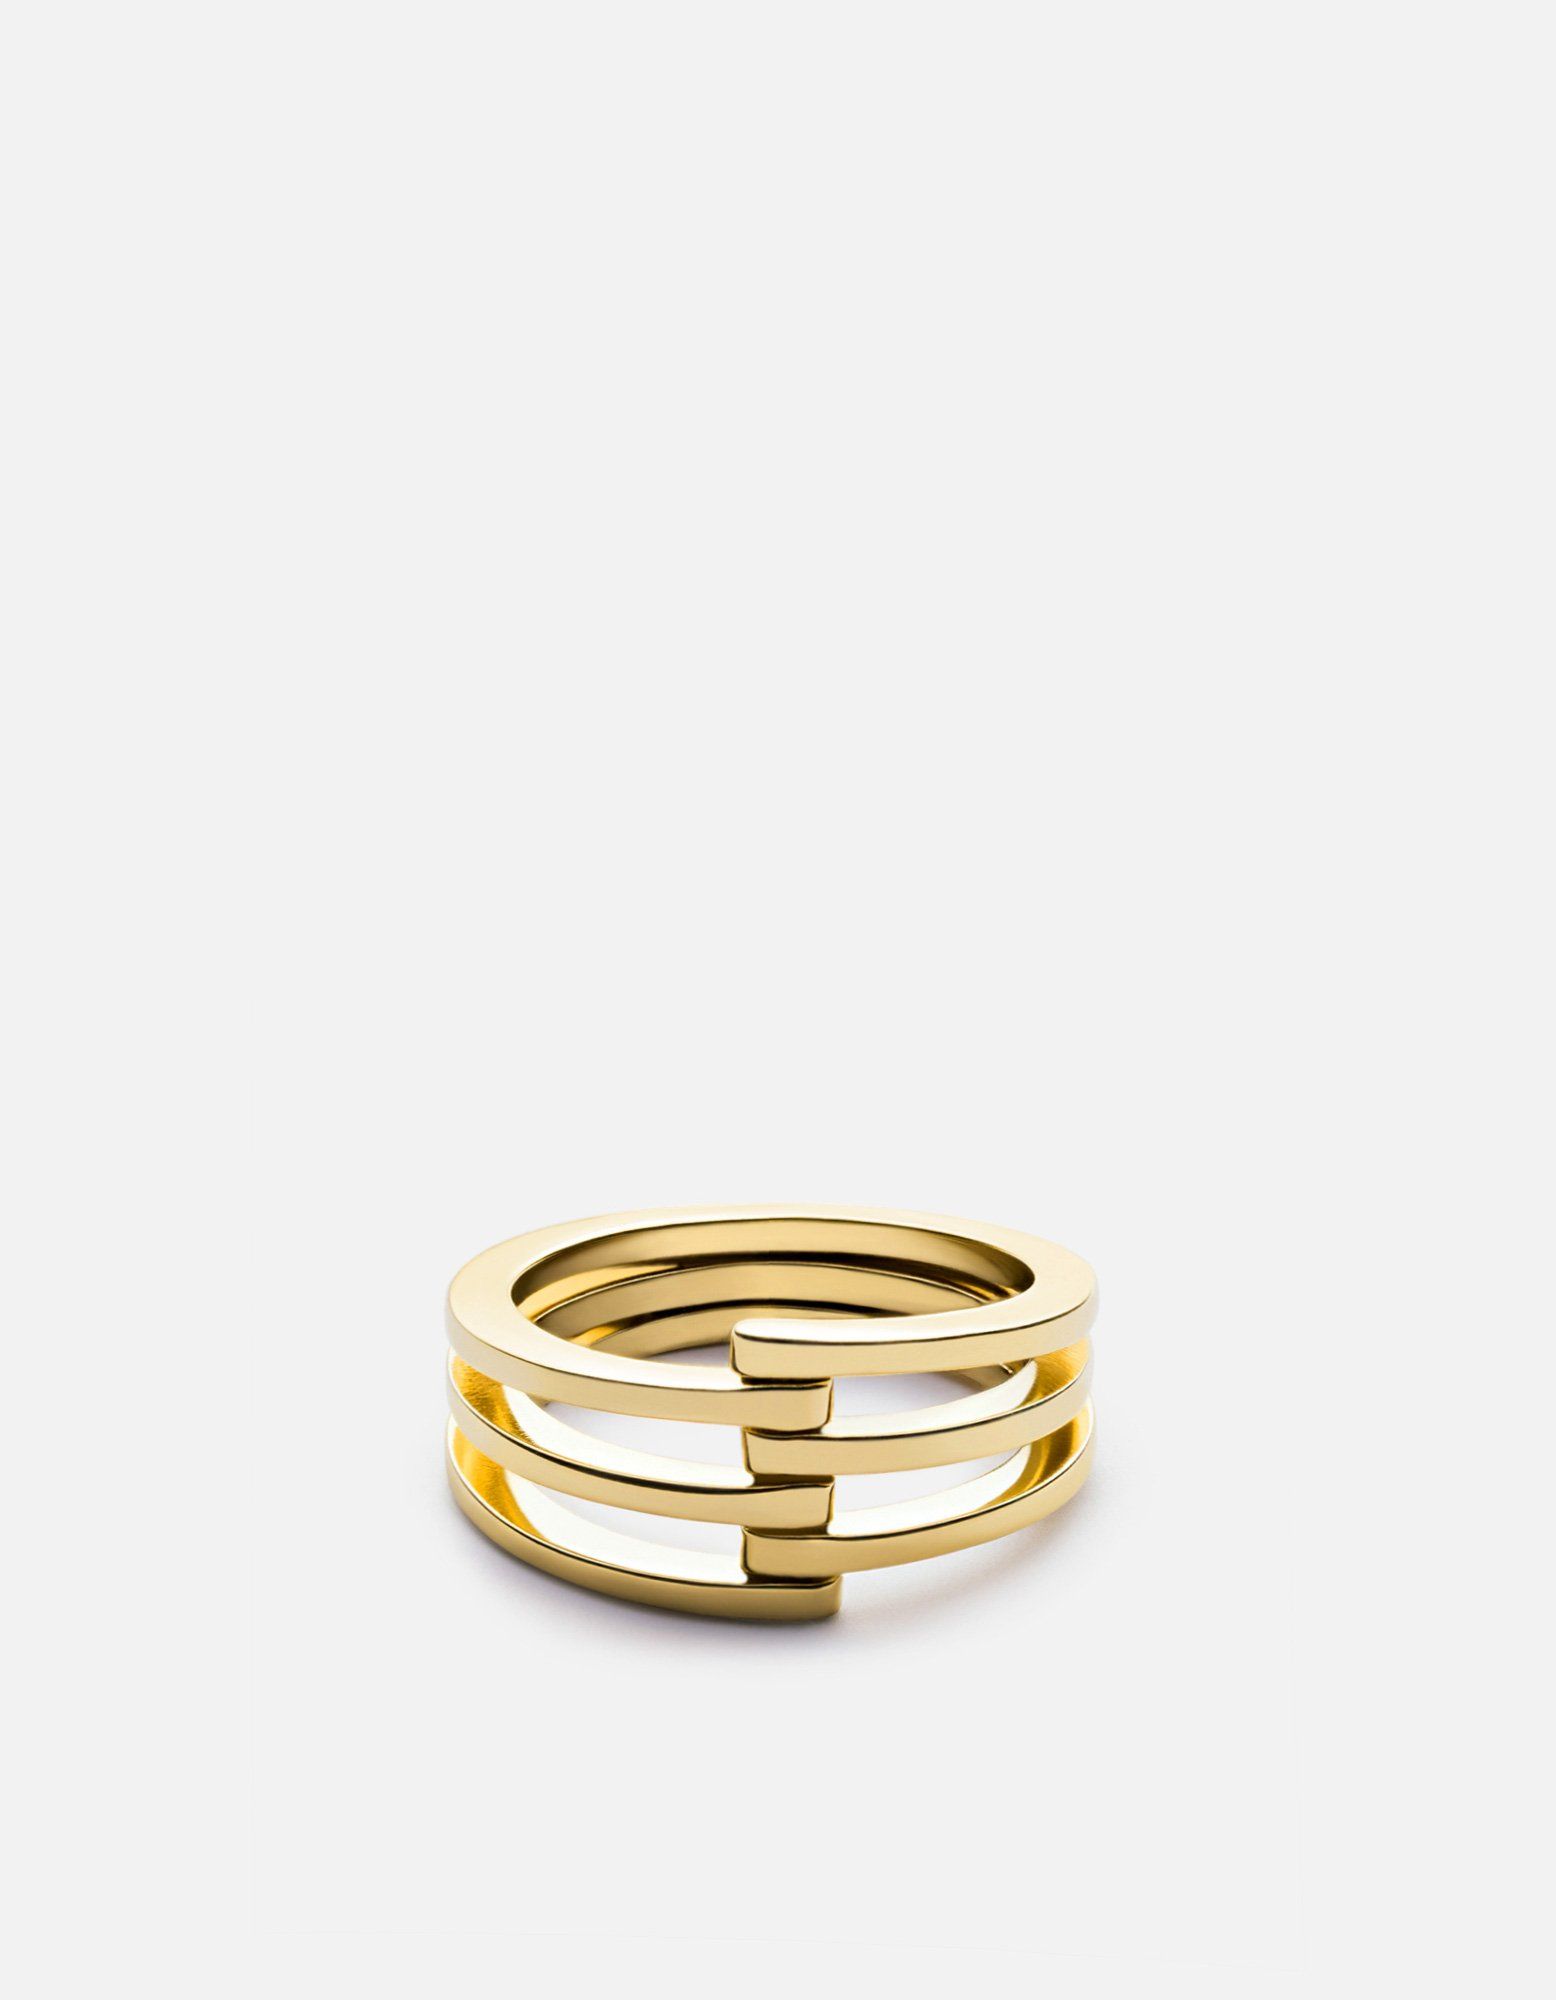 Masculine Elegance: Gold Rings for Men for Every Occasion